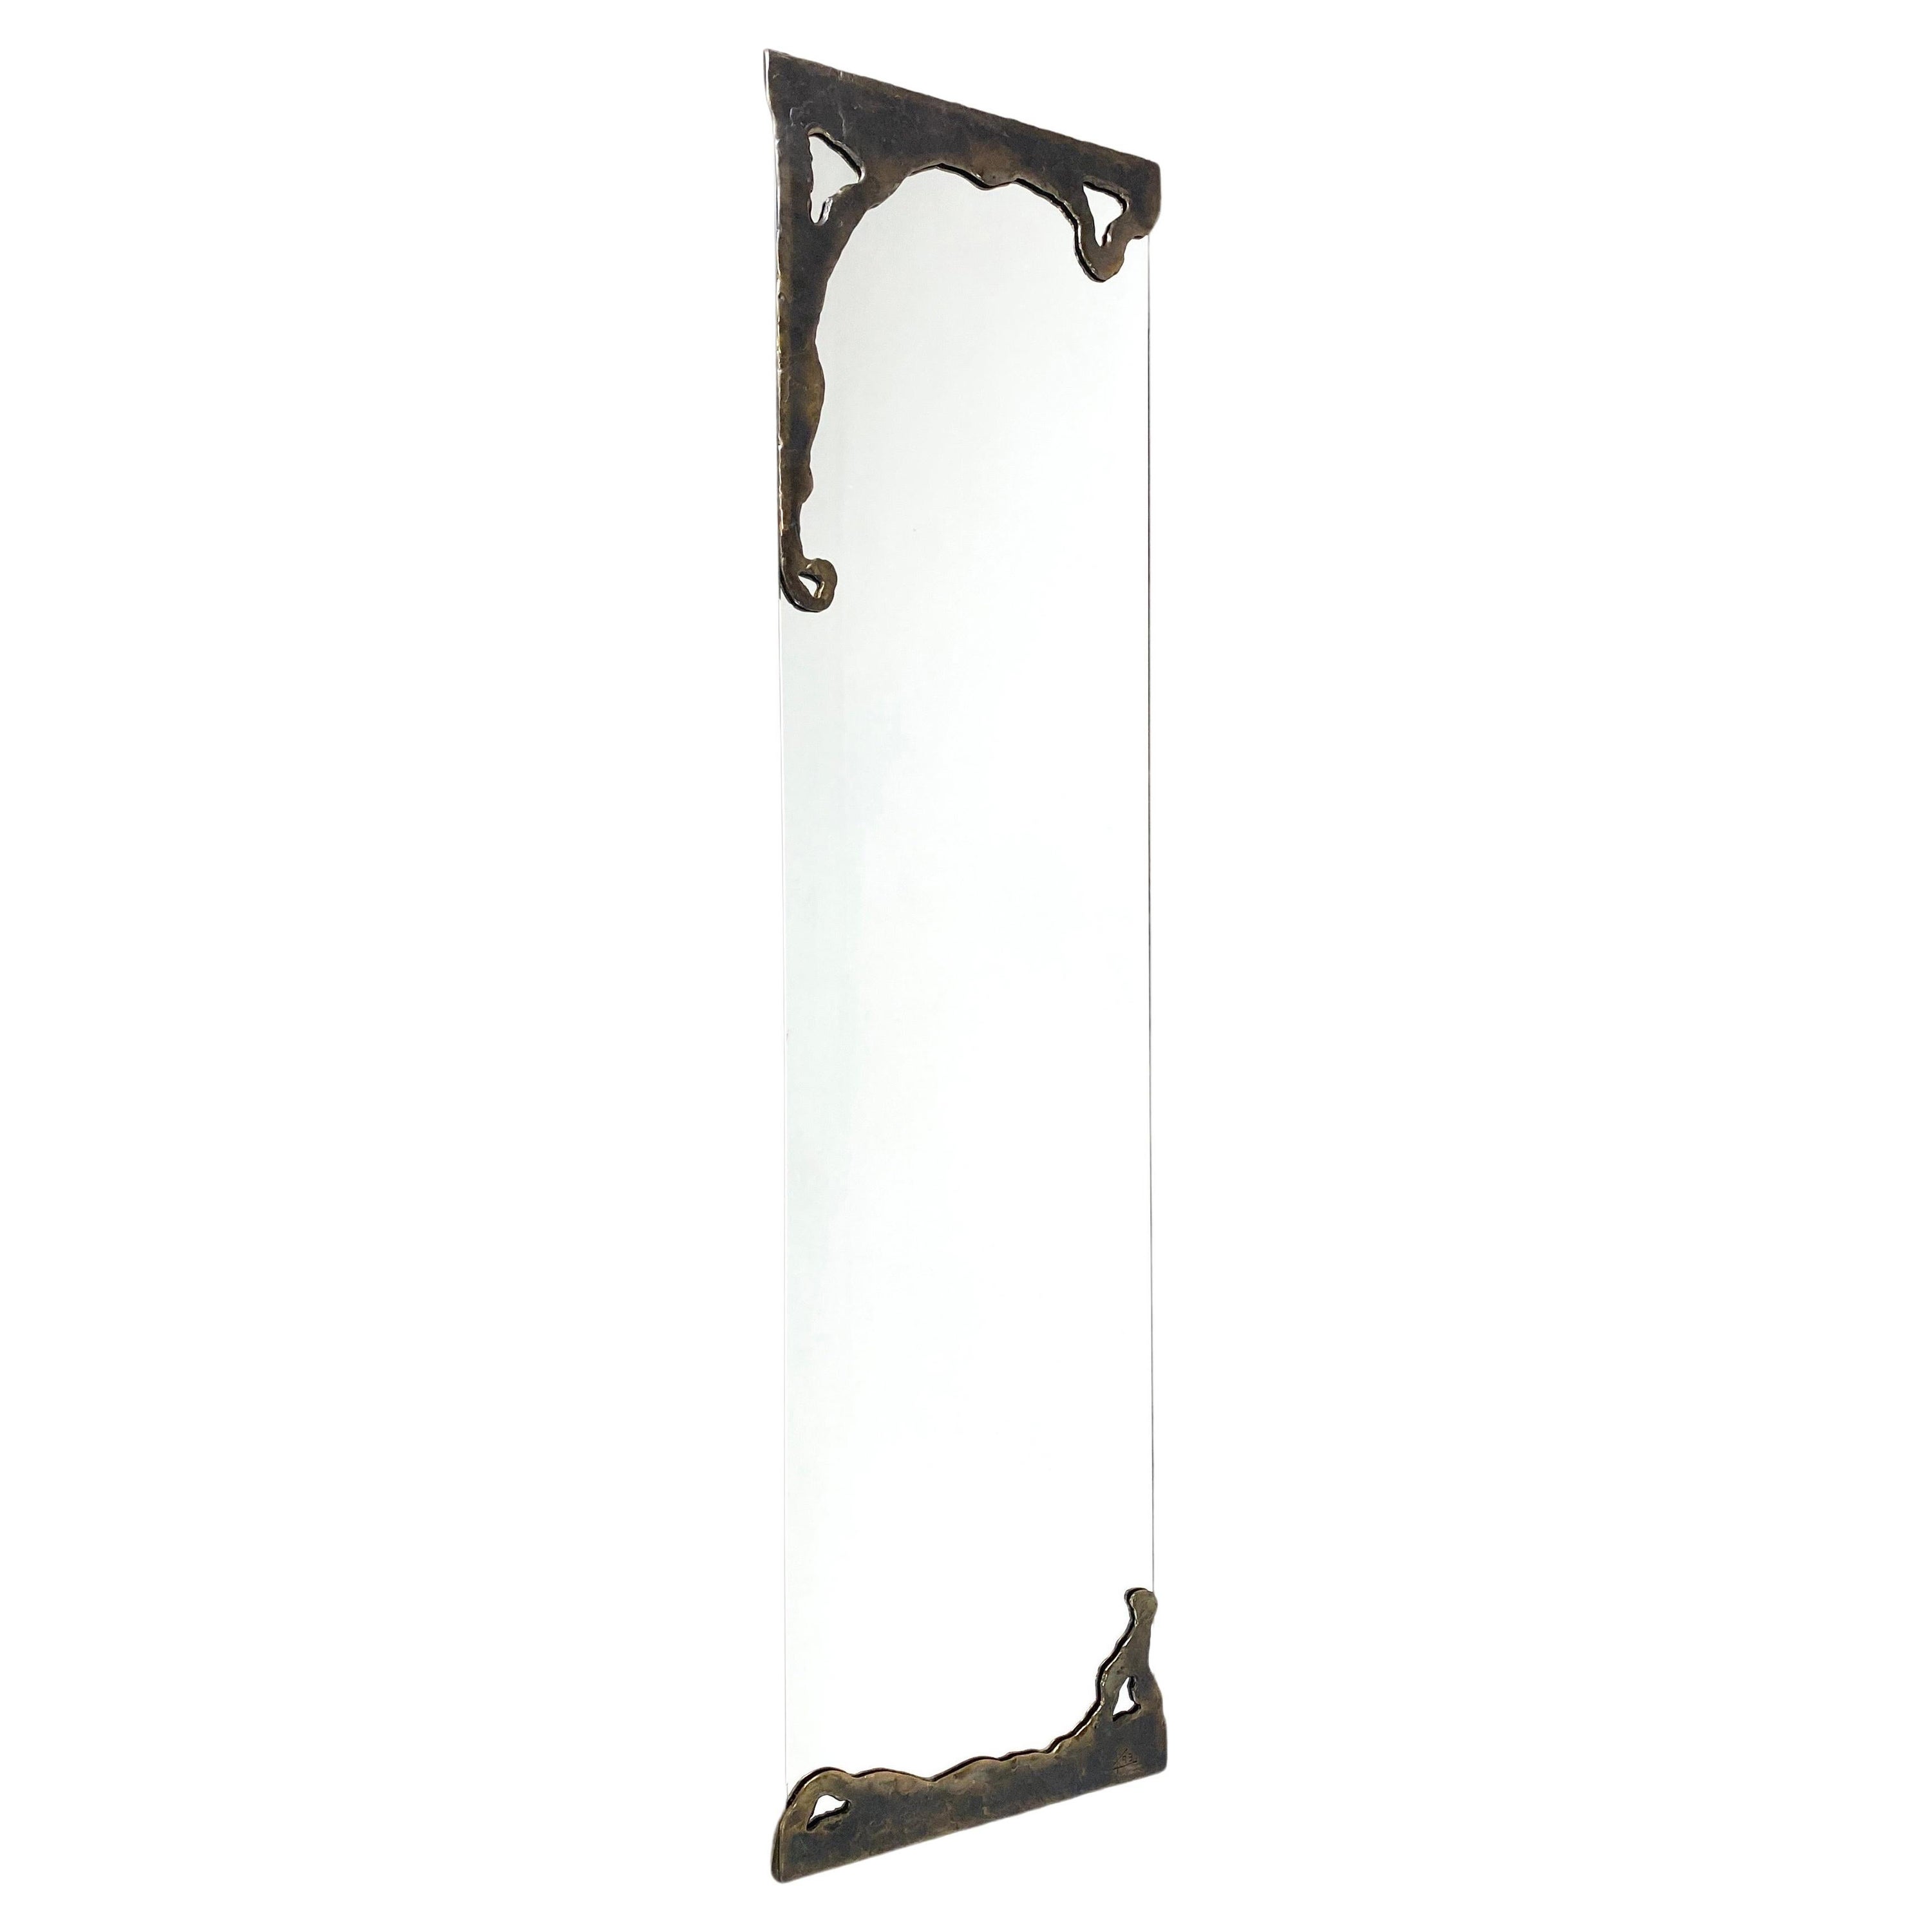 Lothar Klute Sculptural Wall Mirror with Bronze Frame Signed 'LK93‘ For Sale